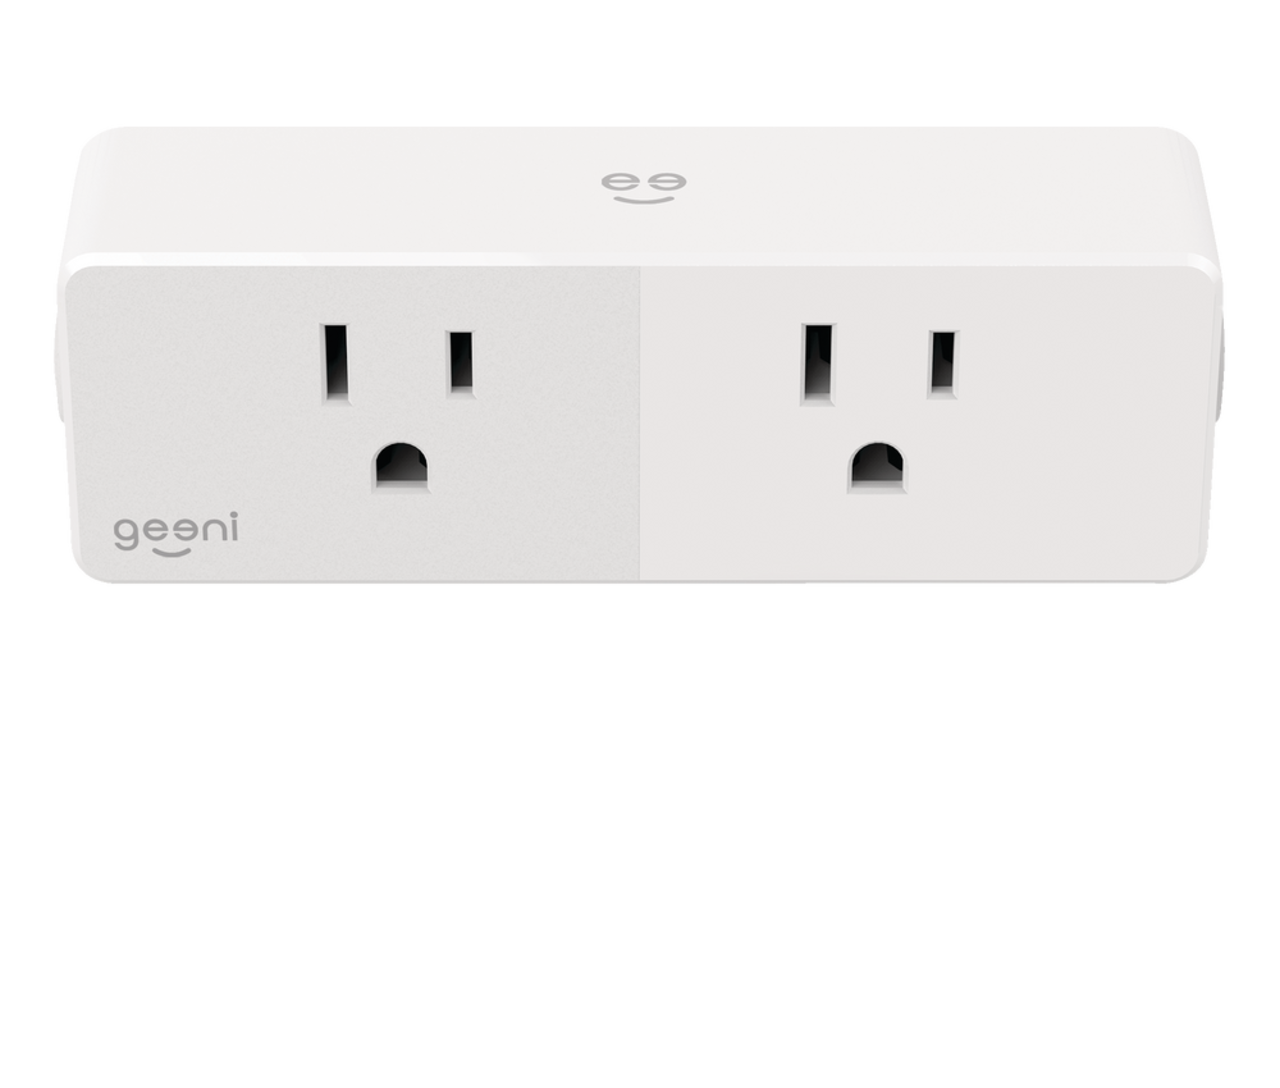 https://media-www.canadiantire.ca/product/fixing/electrical/power-bars-extension-cords-timers/0529318/geeni-switch-duo-2-outlet-smart-plug-be673491-485c-4bfe-ac6e-442995c092d0.png?imdensity=1&imwidth=640&impolicy=mZoom